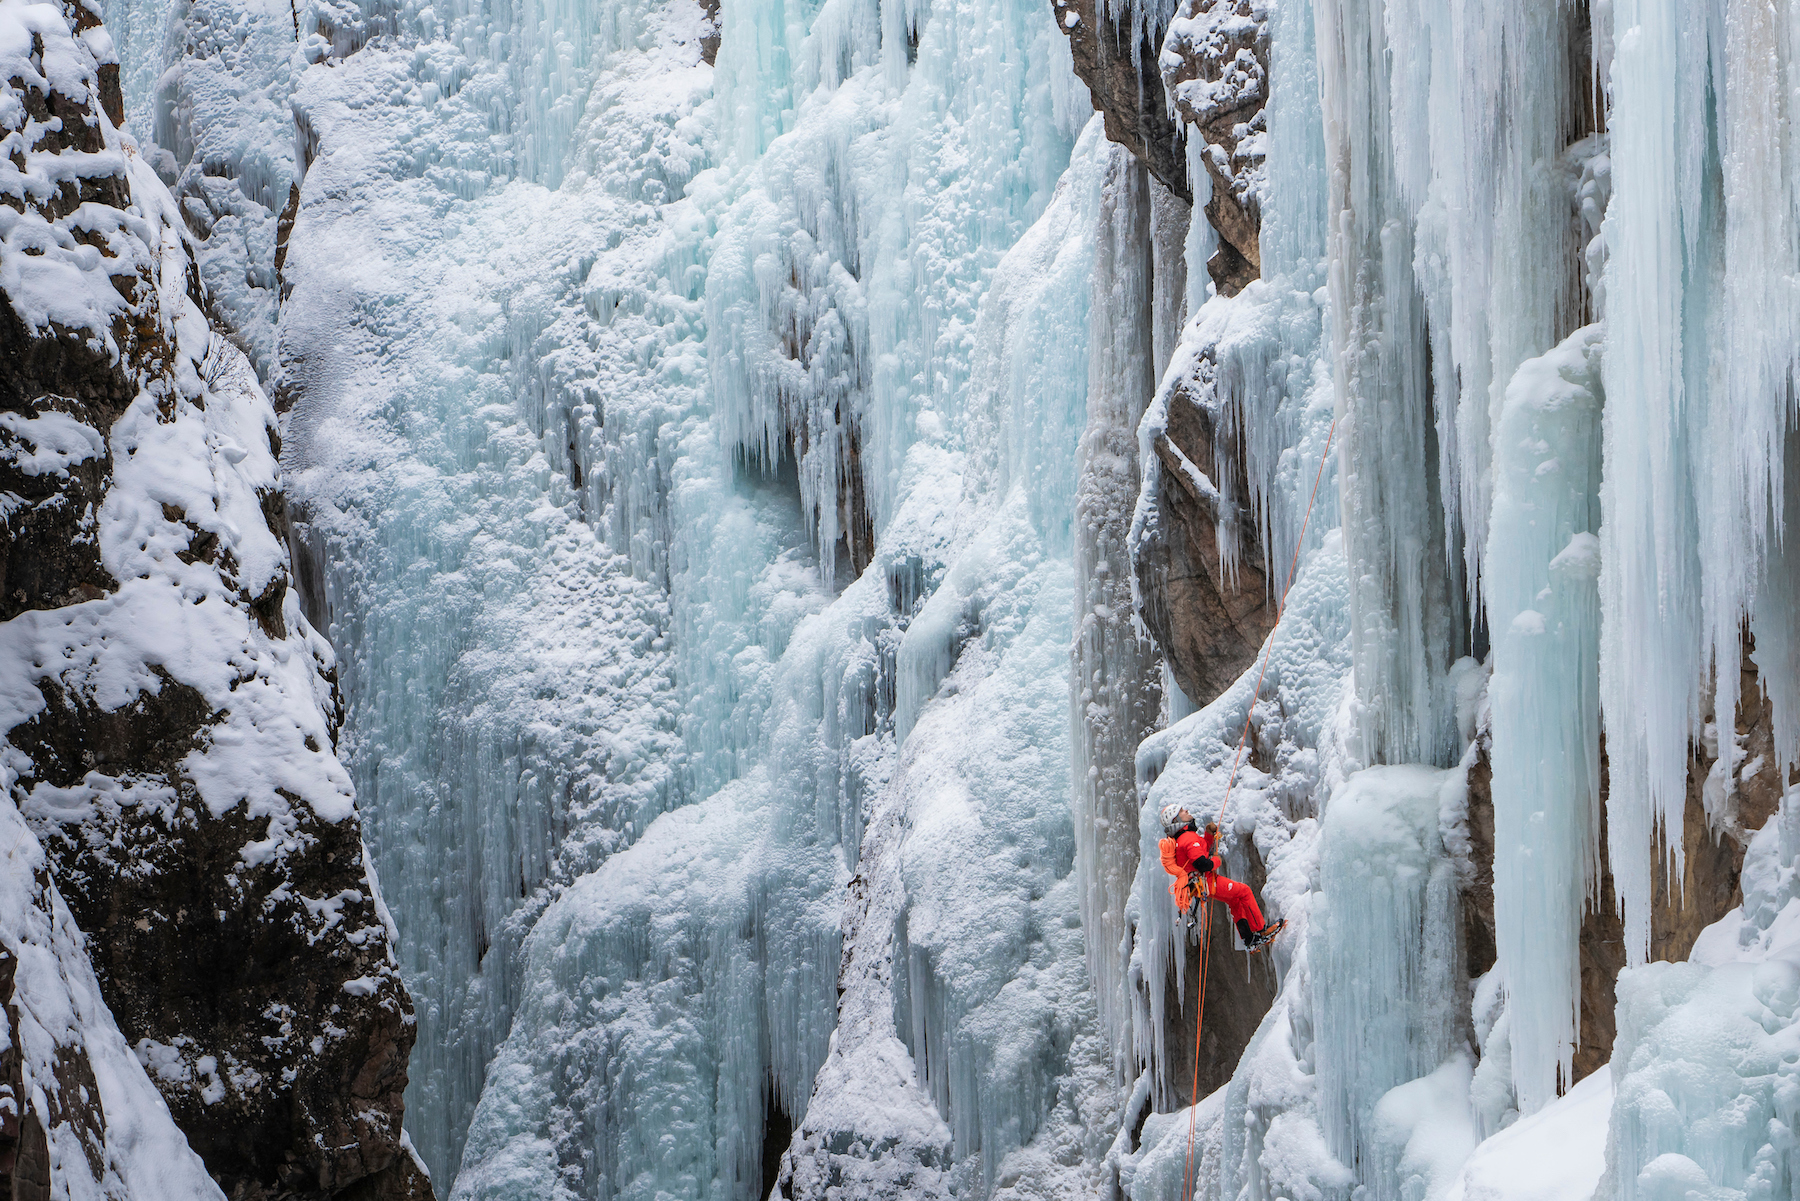 Ouray Ice Park Is One of the Best Places to Ice Climb in the World and